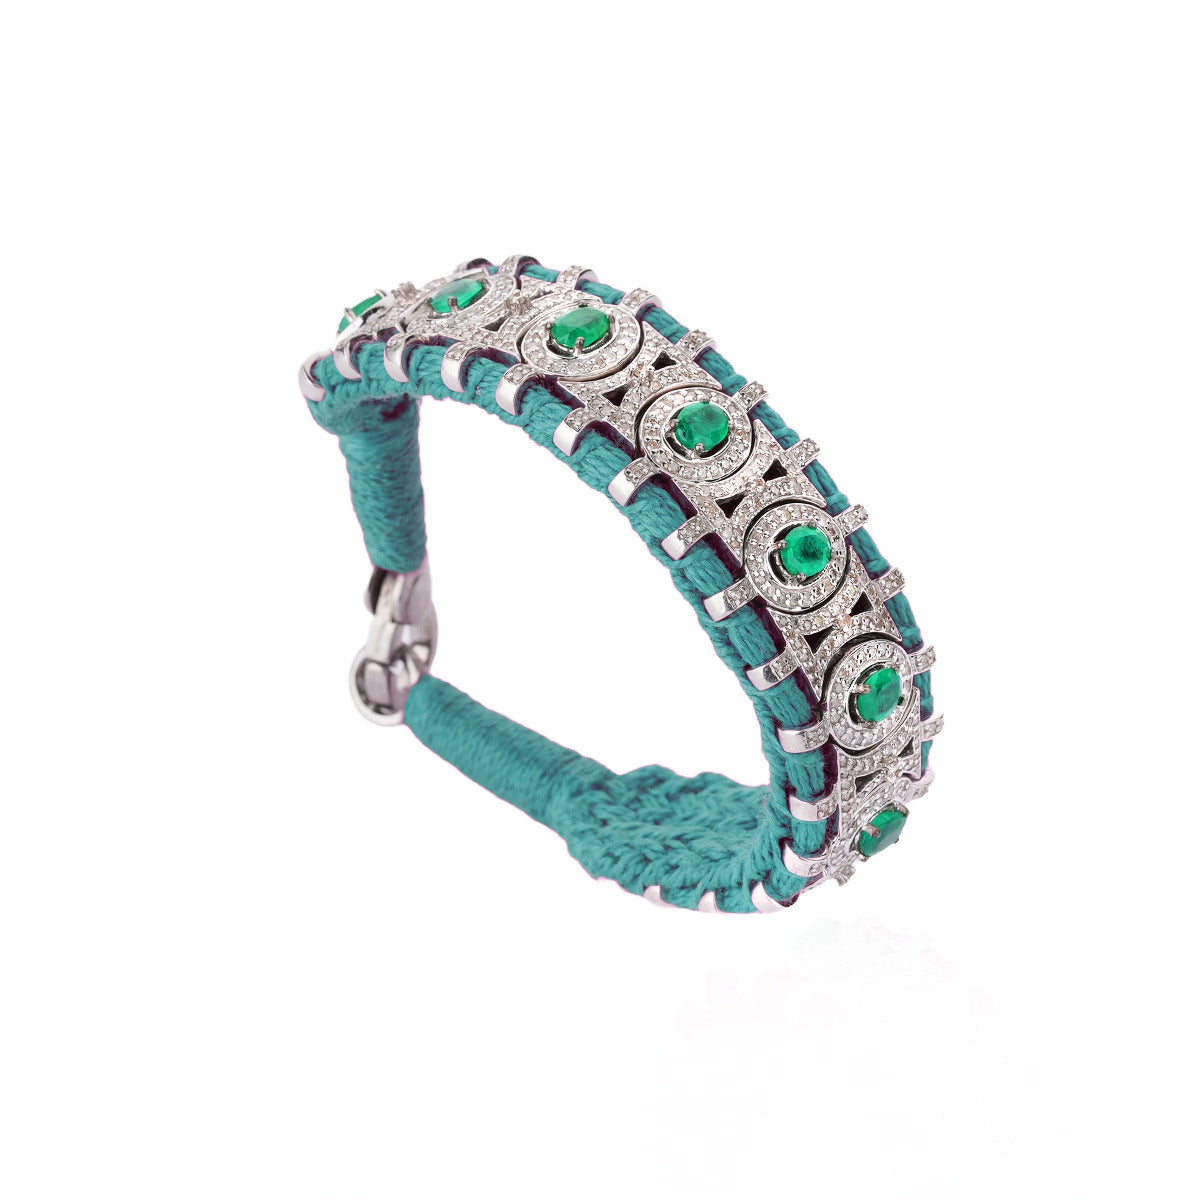 Sao Paulo Turquoise and Emeralds bracelet in 925 silver and diamonds